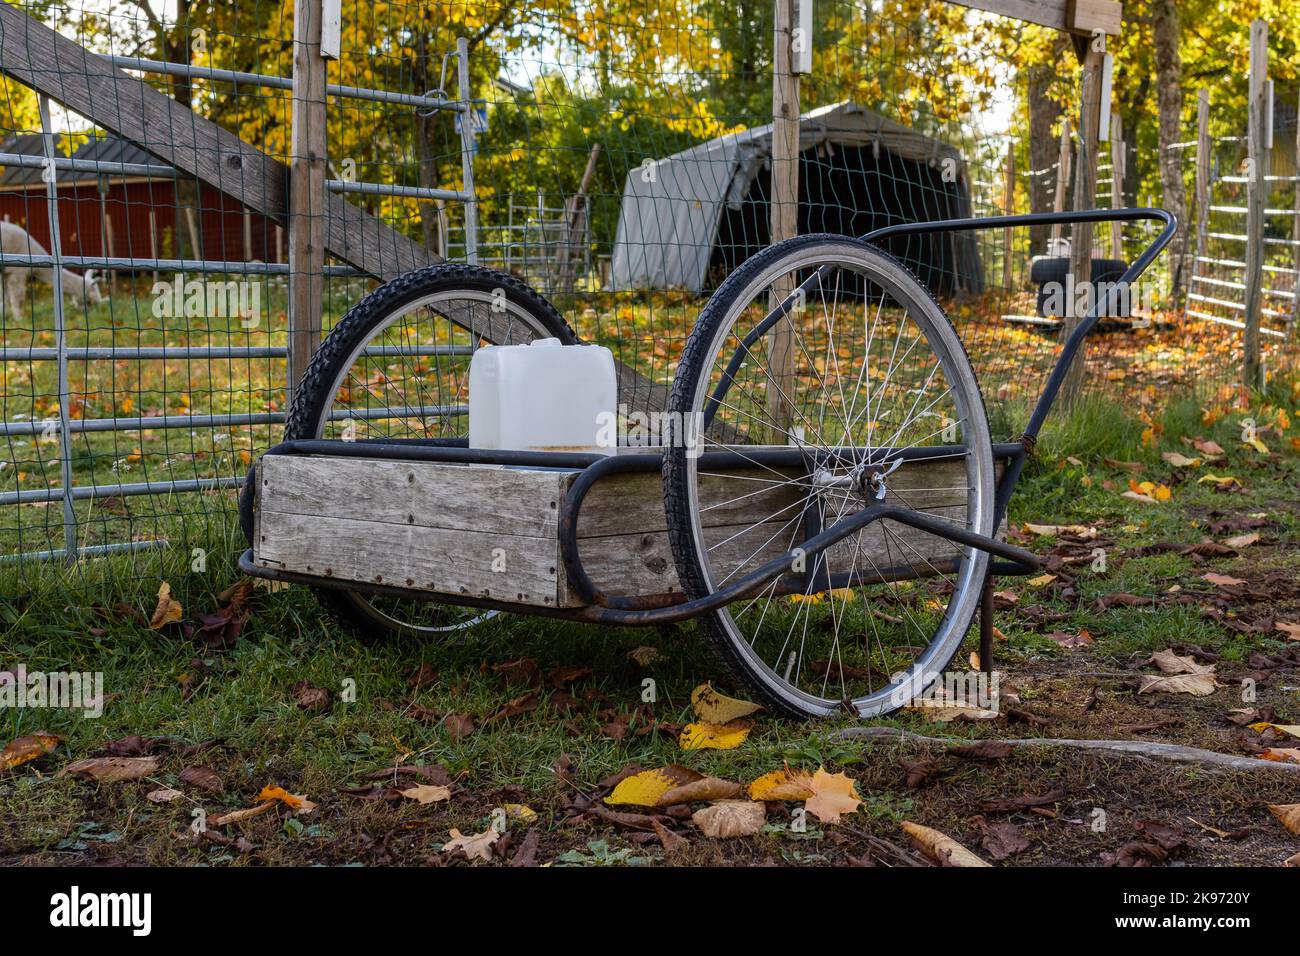 Old traditional pushcart in front of animal enclosure Stock Photo